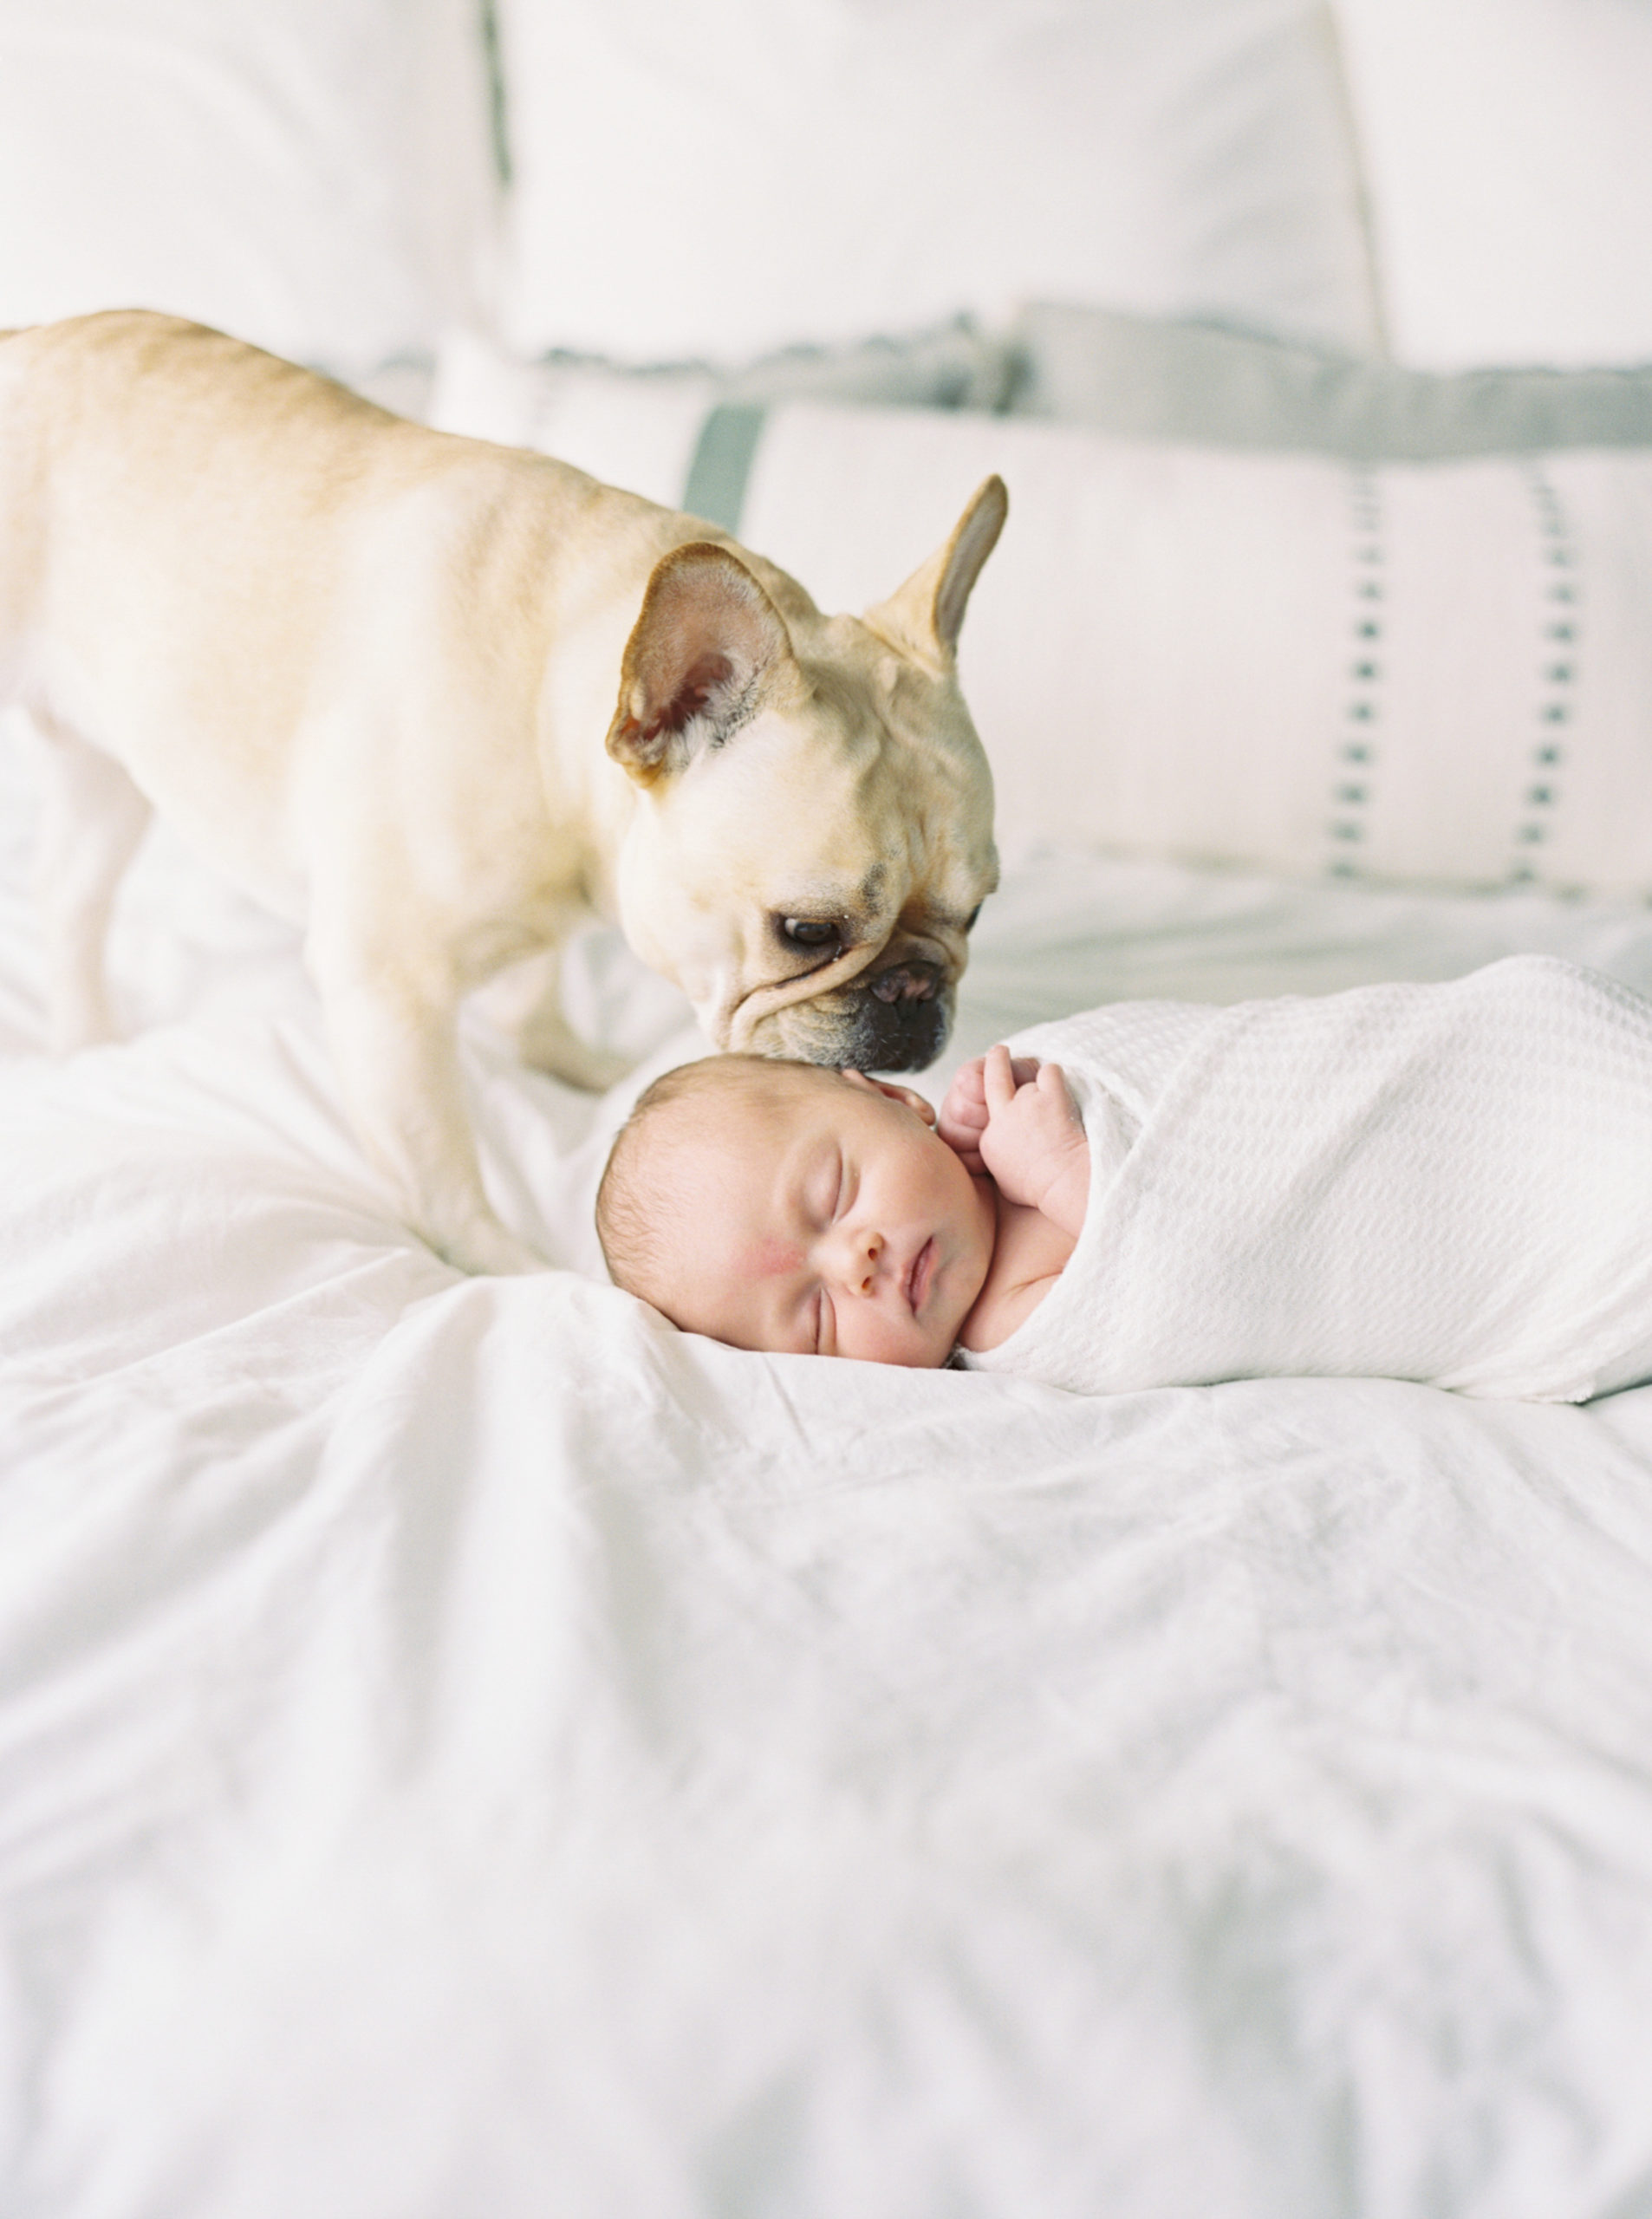 Family dog cuddling baby in a beautiful, bright bedroom